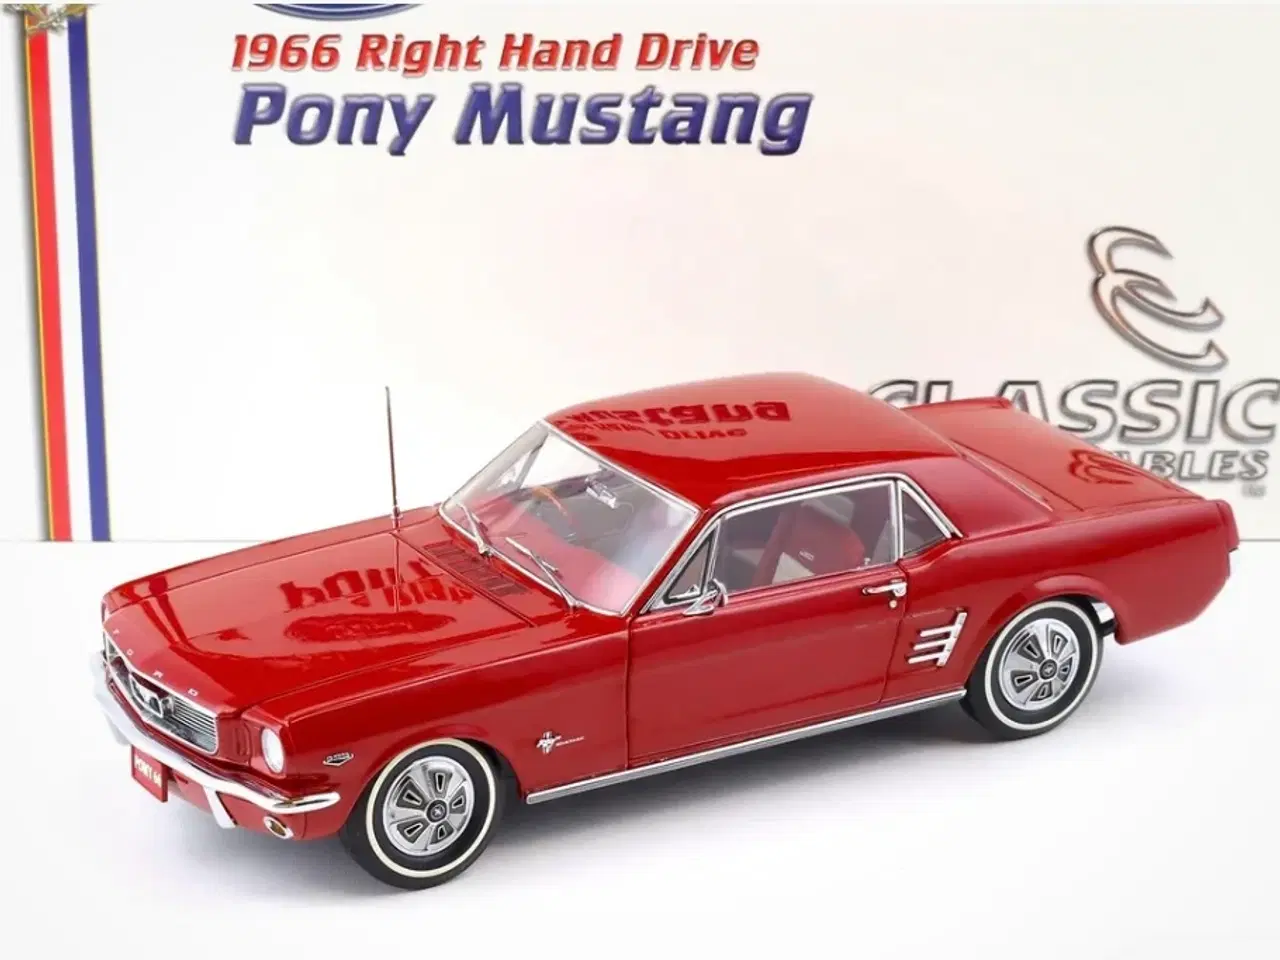 Billede 1 - 1:18 Ford Mustang RHD Coupe 1966